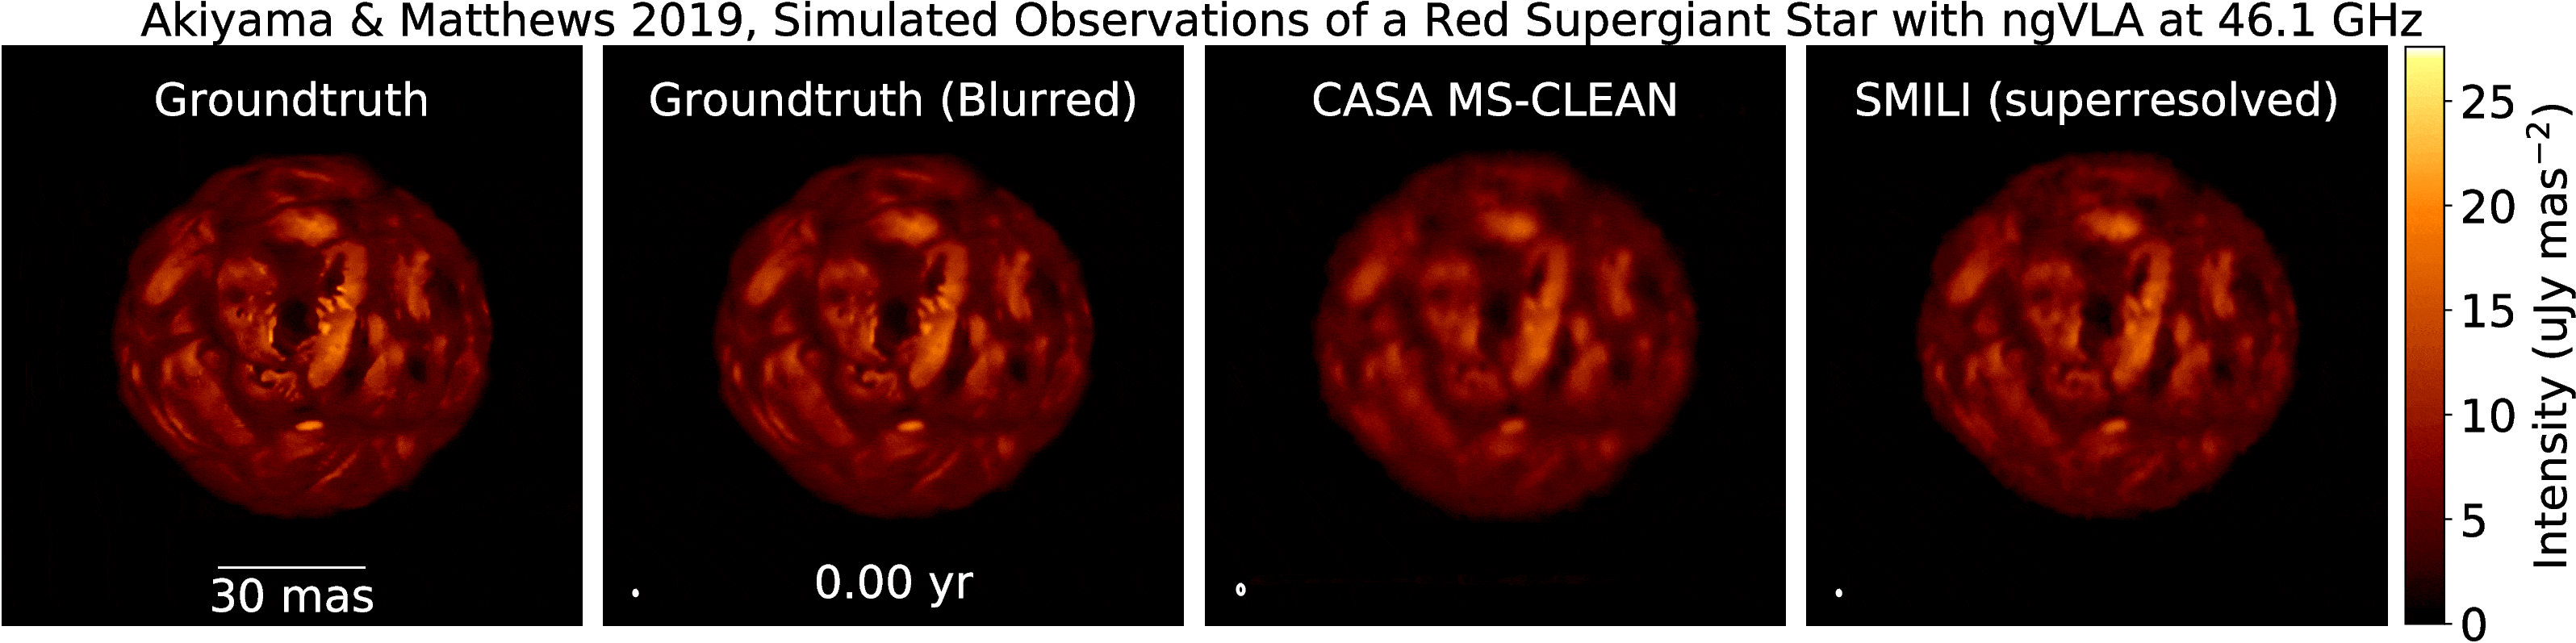 Simulated ngVLA observation of a red supergiant star